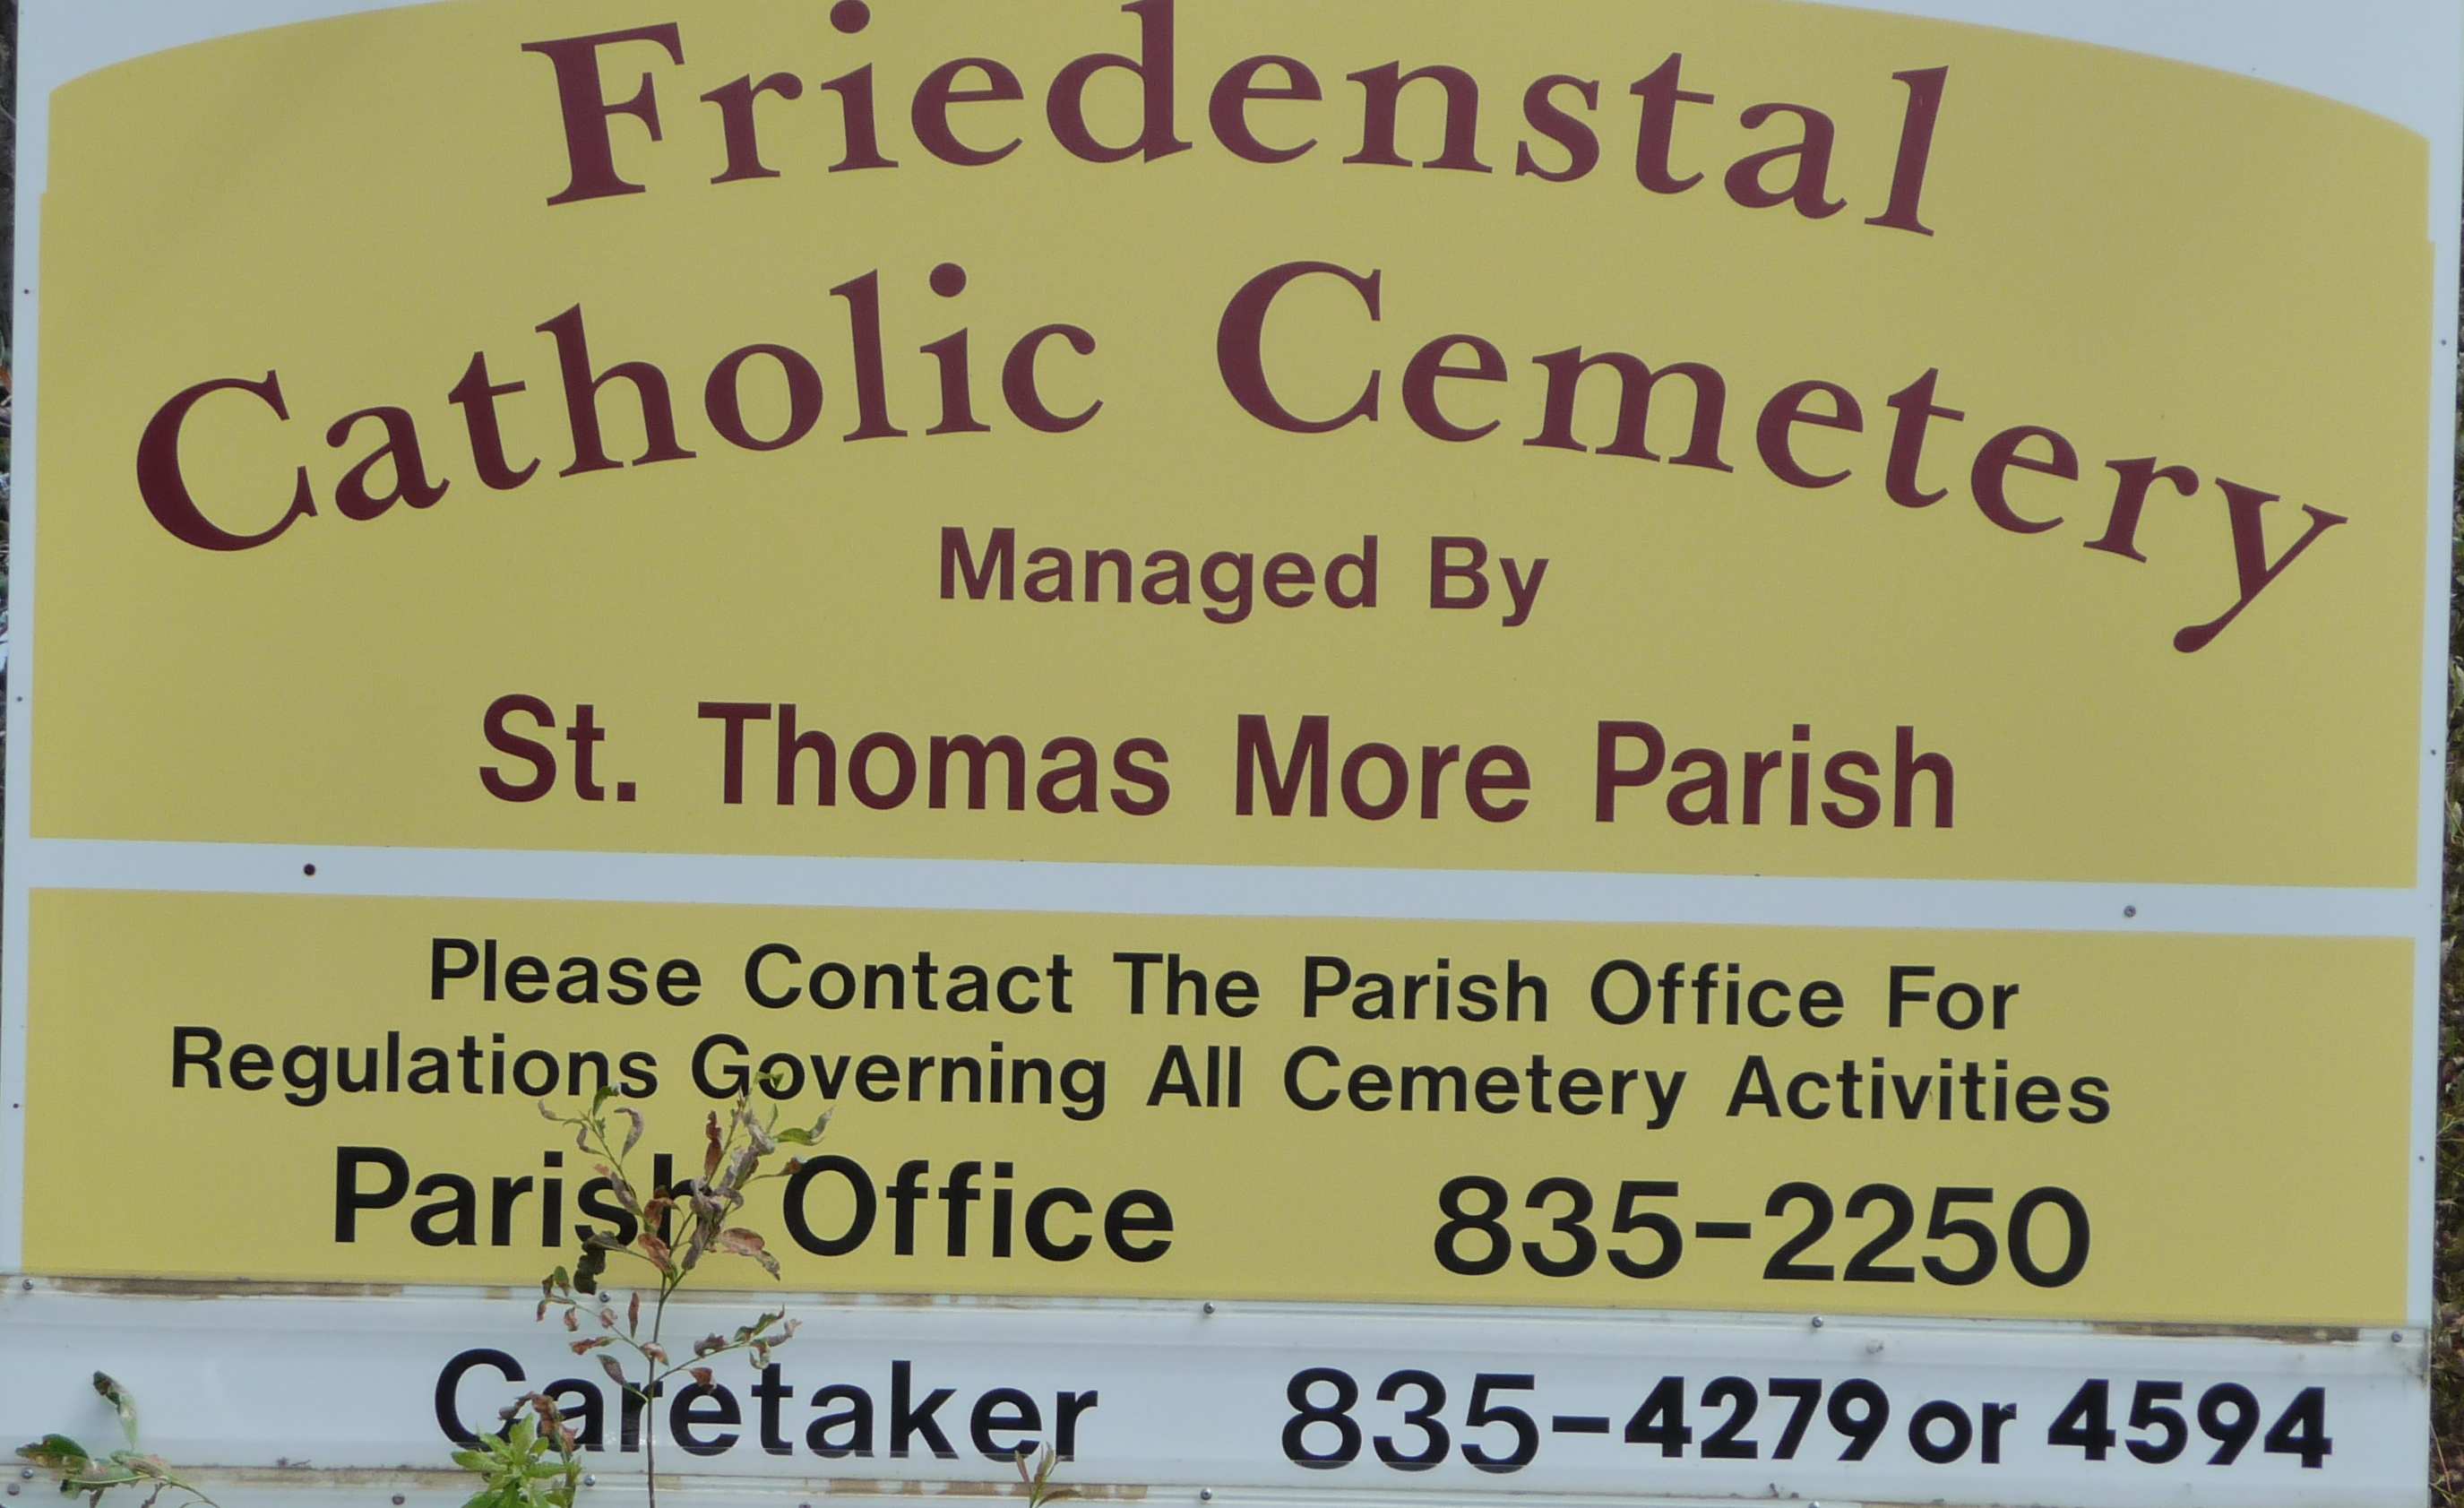 Friedenstal Catholic Cemetary Contact Information